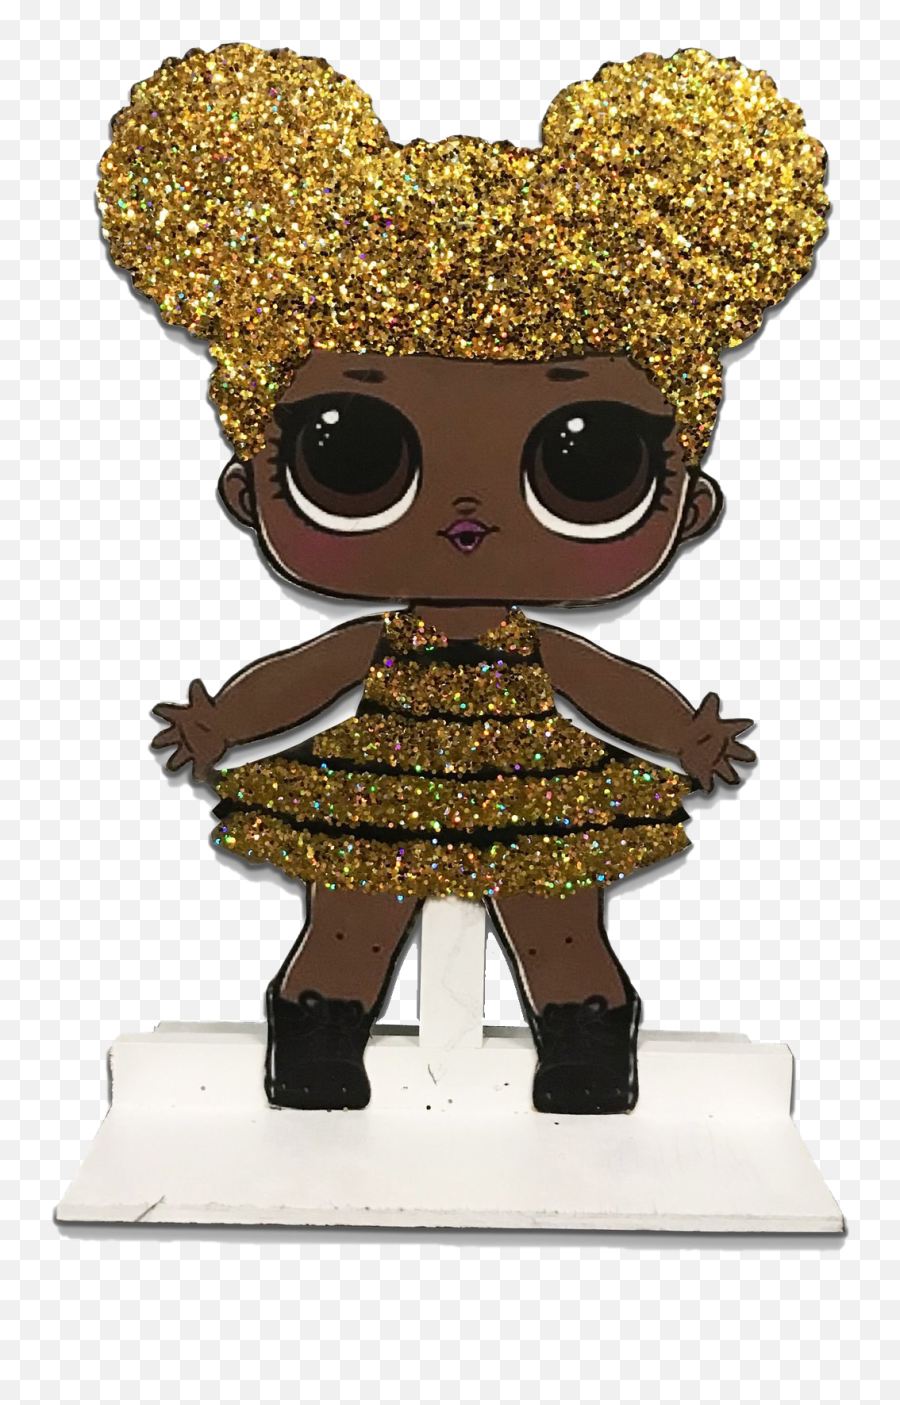 Lol Doll Png Image File - Lol Surprise Doll Queen Bee,Lol Transparent